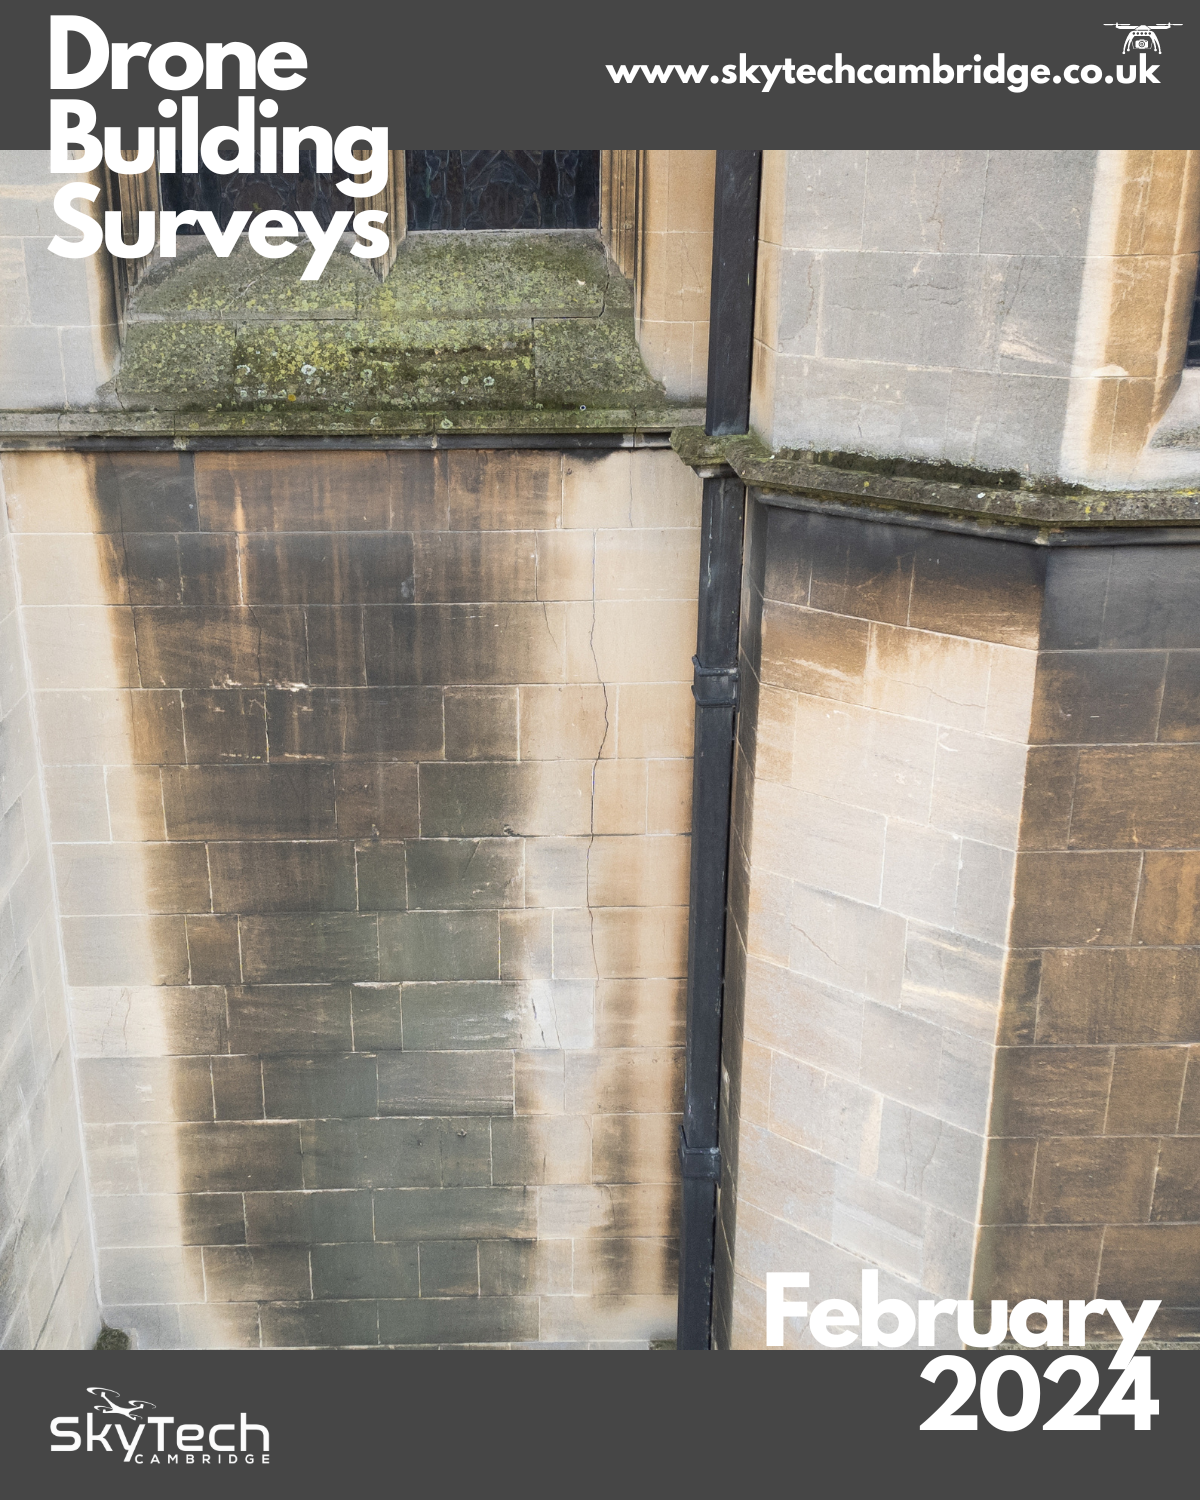 Drone building survey - cracked blockwork suggests a structural concern on this church